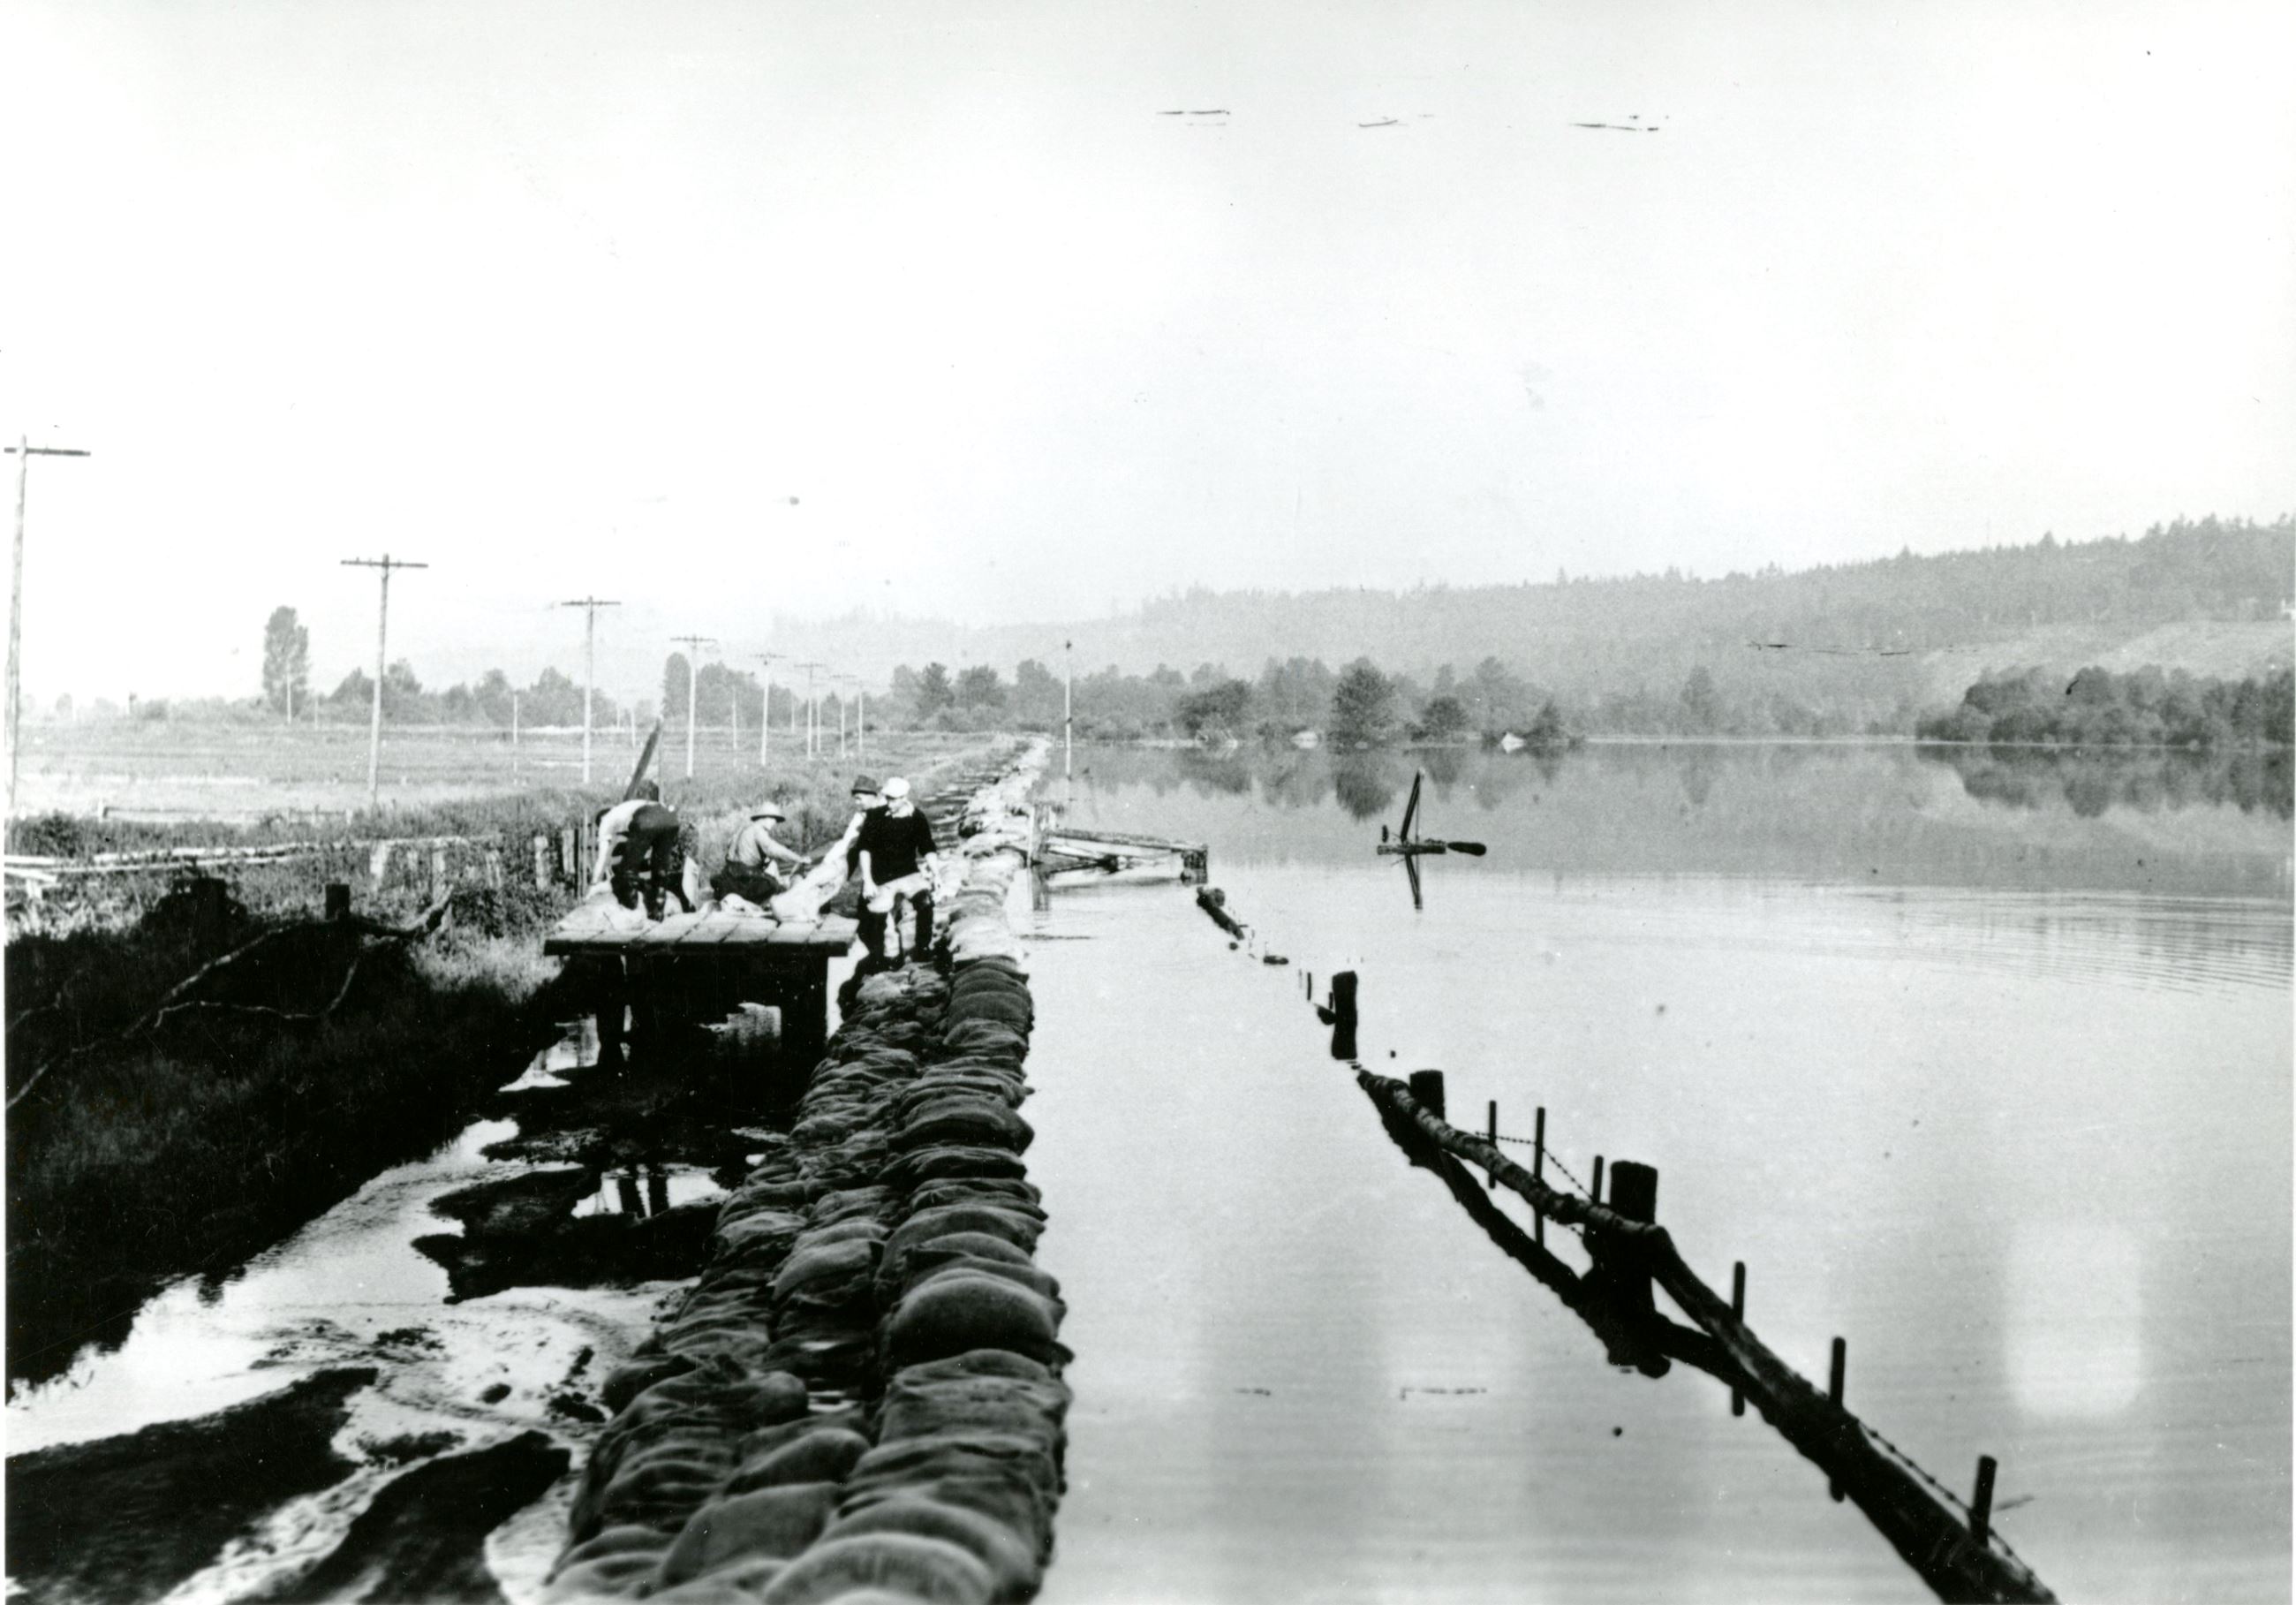 Maintaining the dykes during Flood at Colony Farm (Source City of Coquitlam Archives, C6.1087) Opens in new window